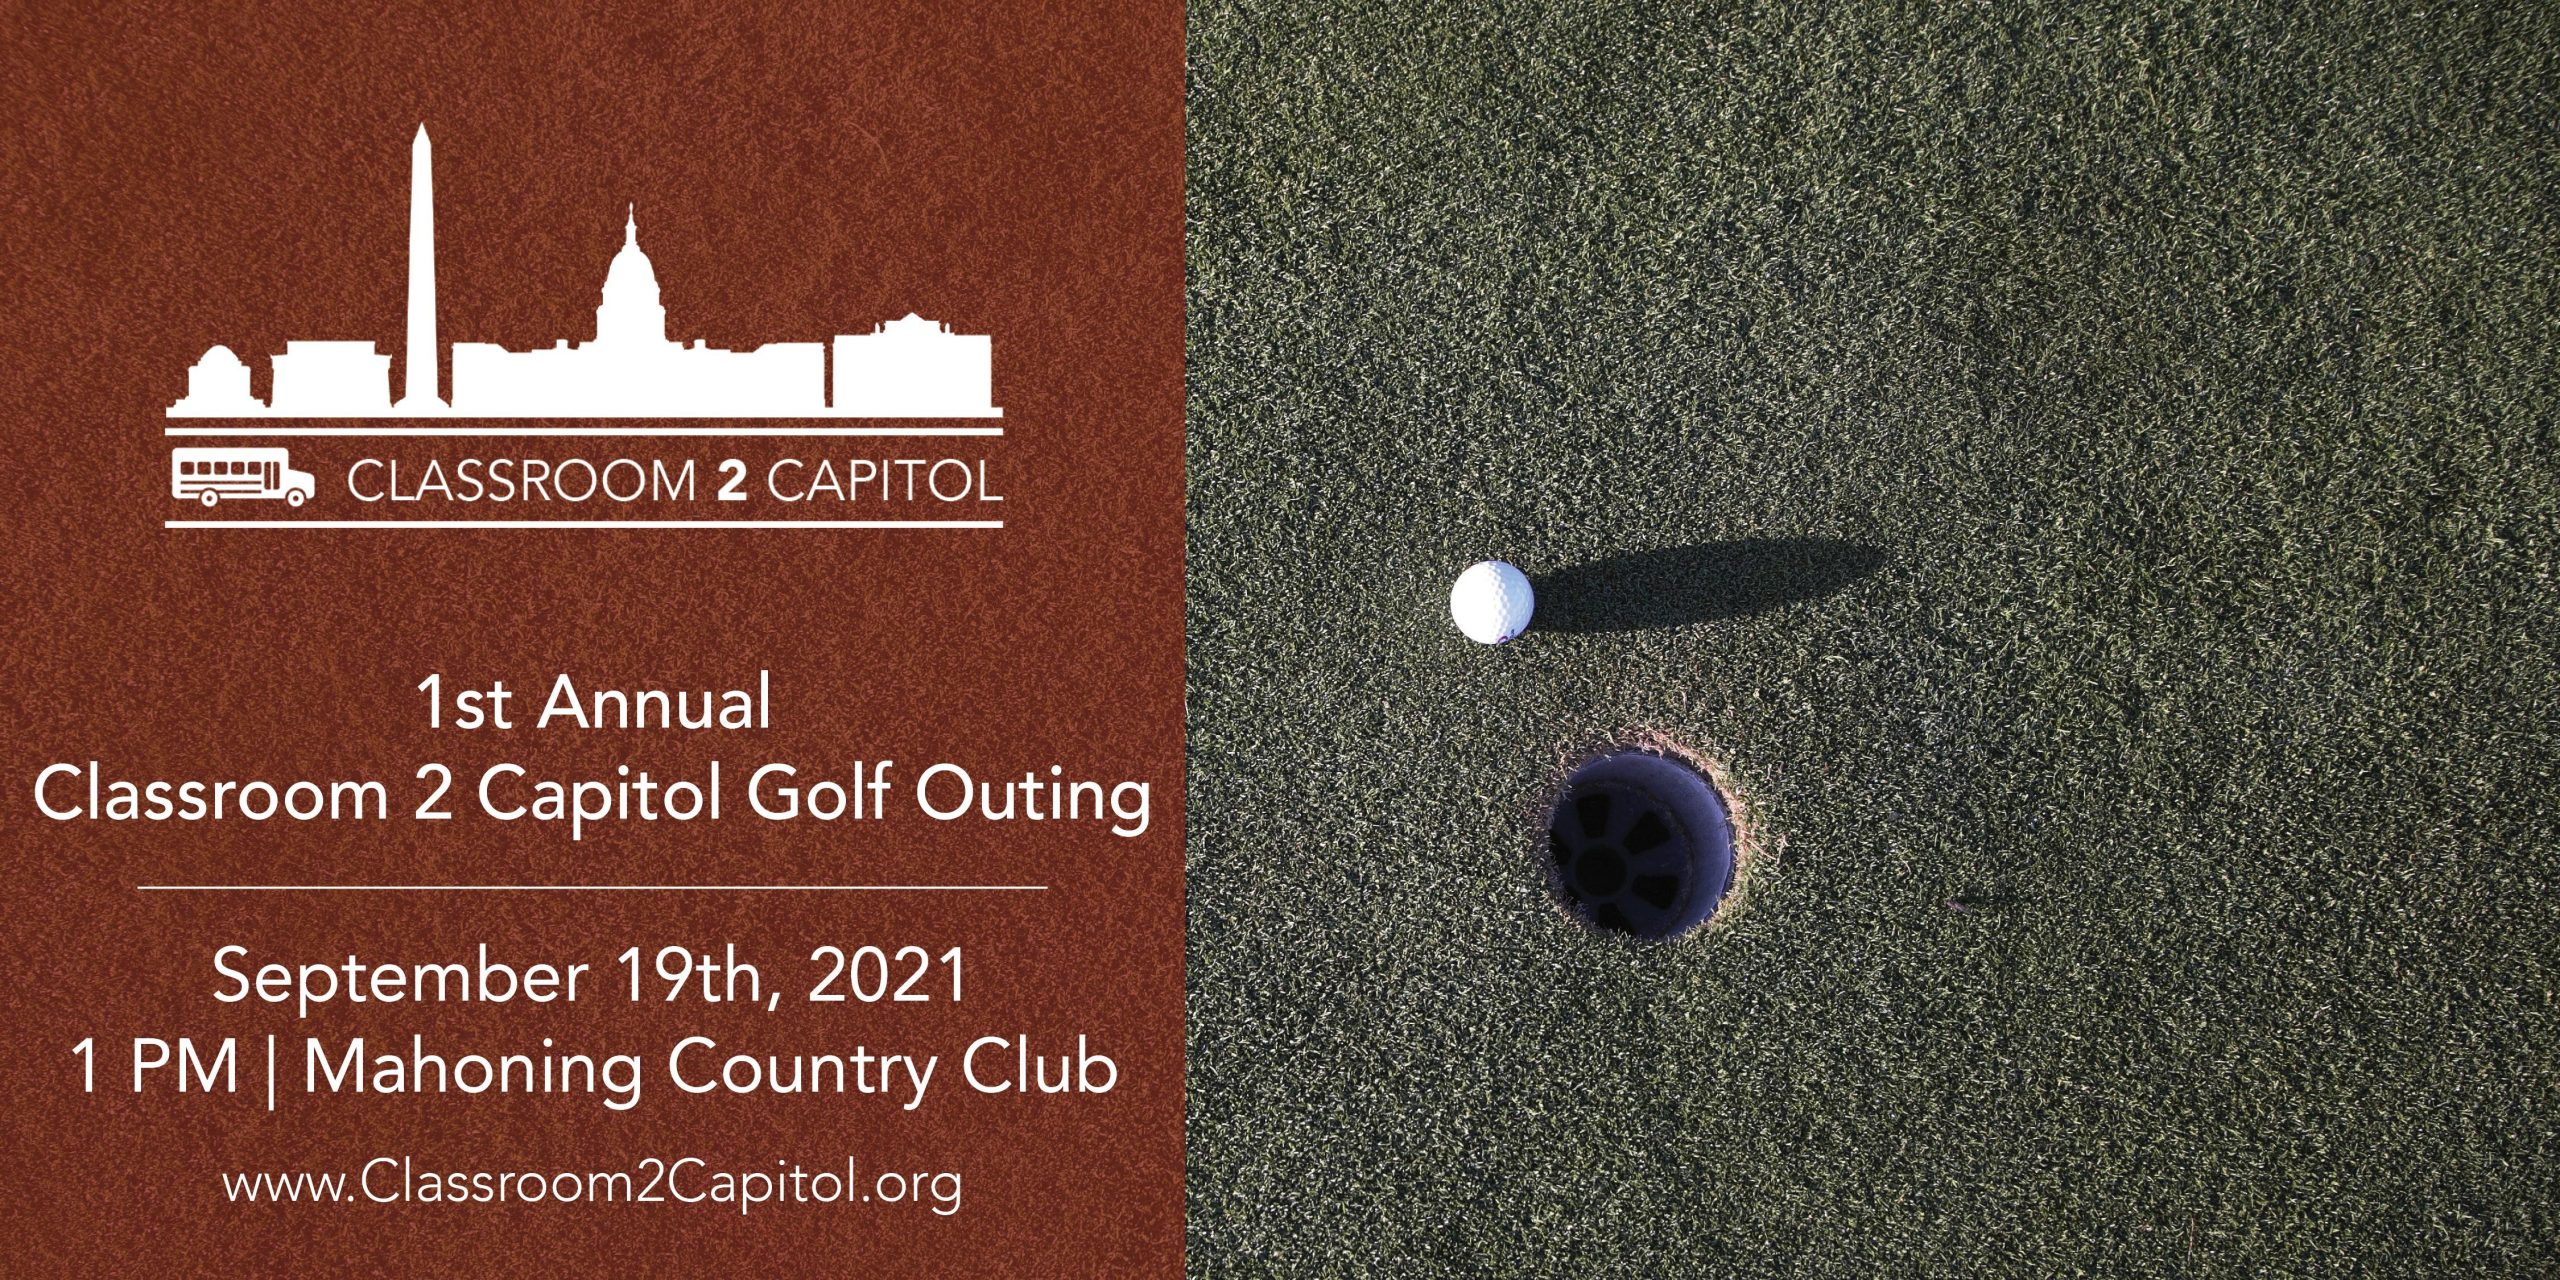 Classroom 2 Capitol - First Annual Golf Outing